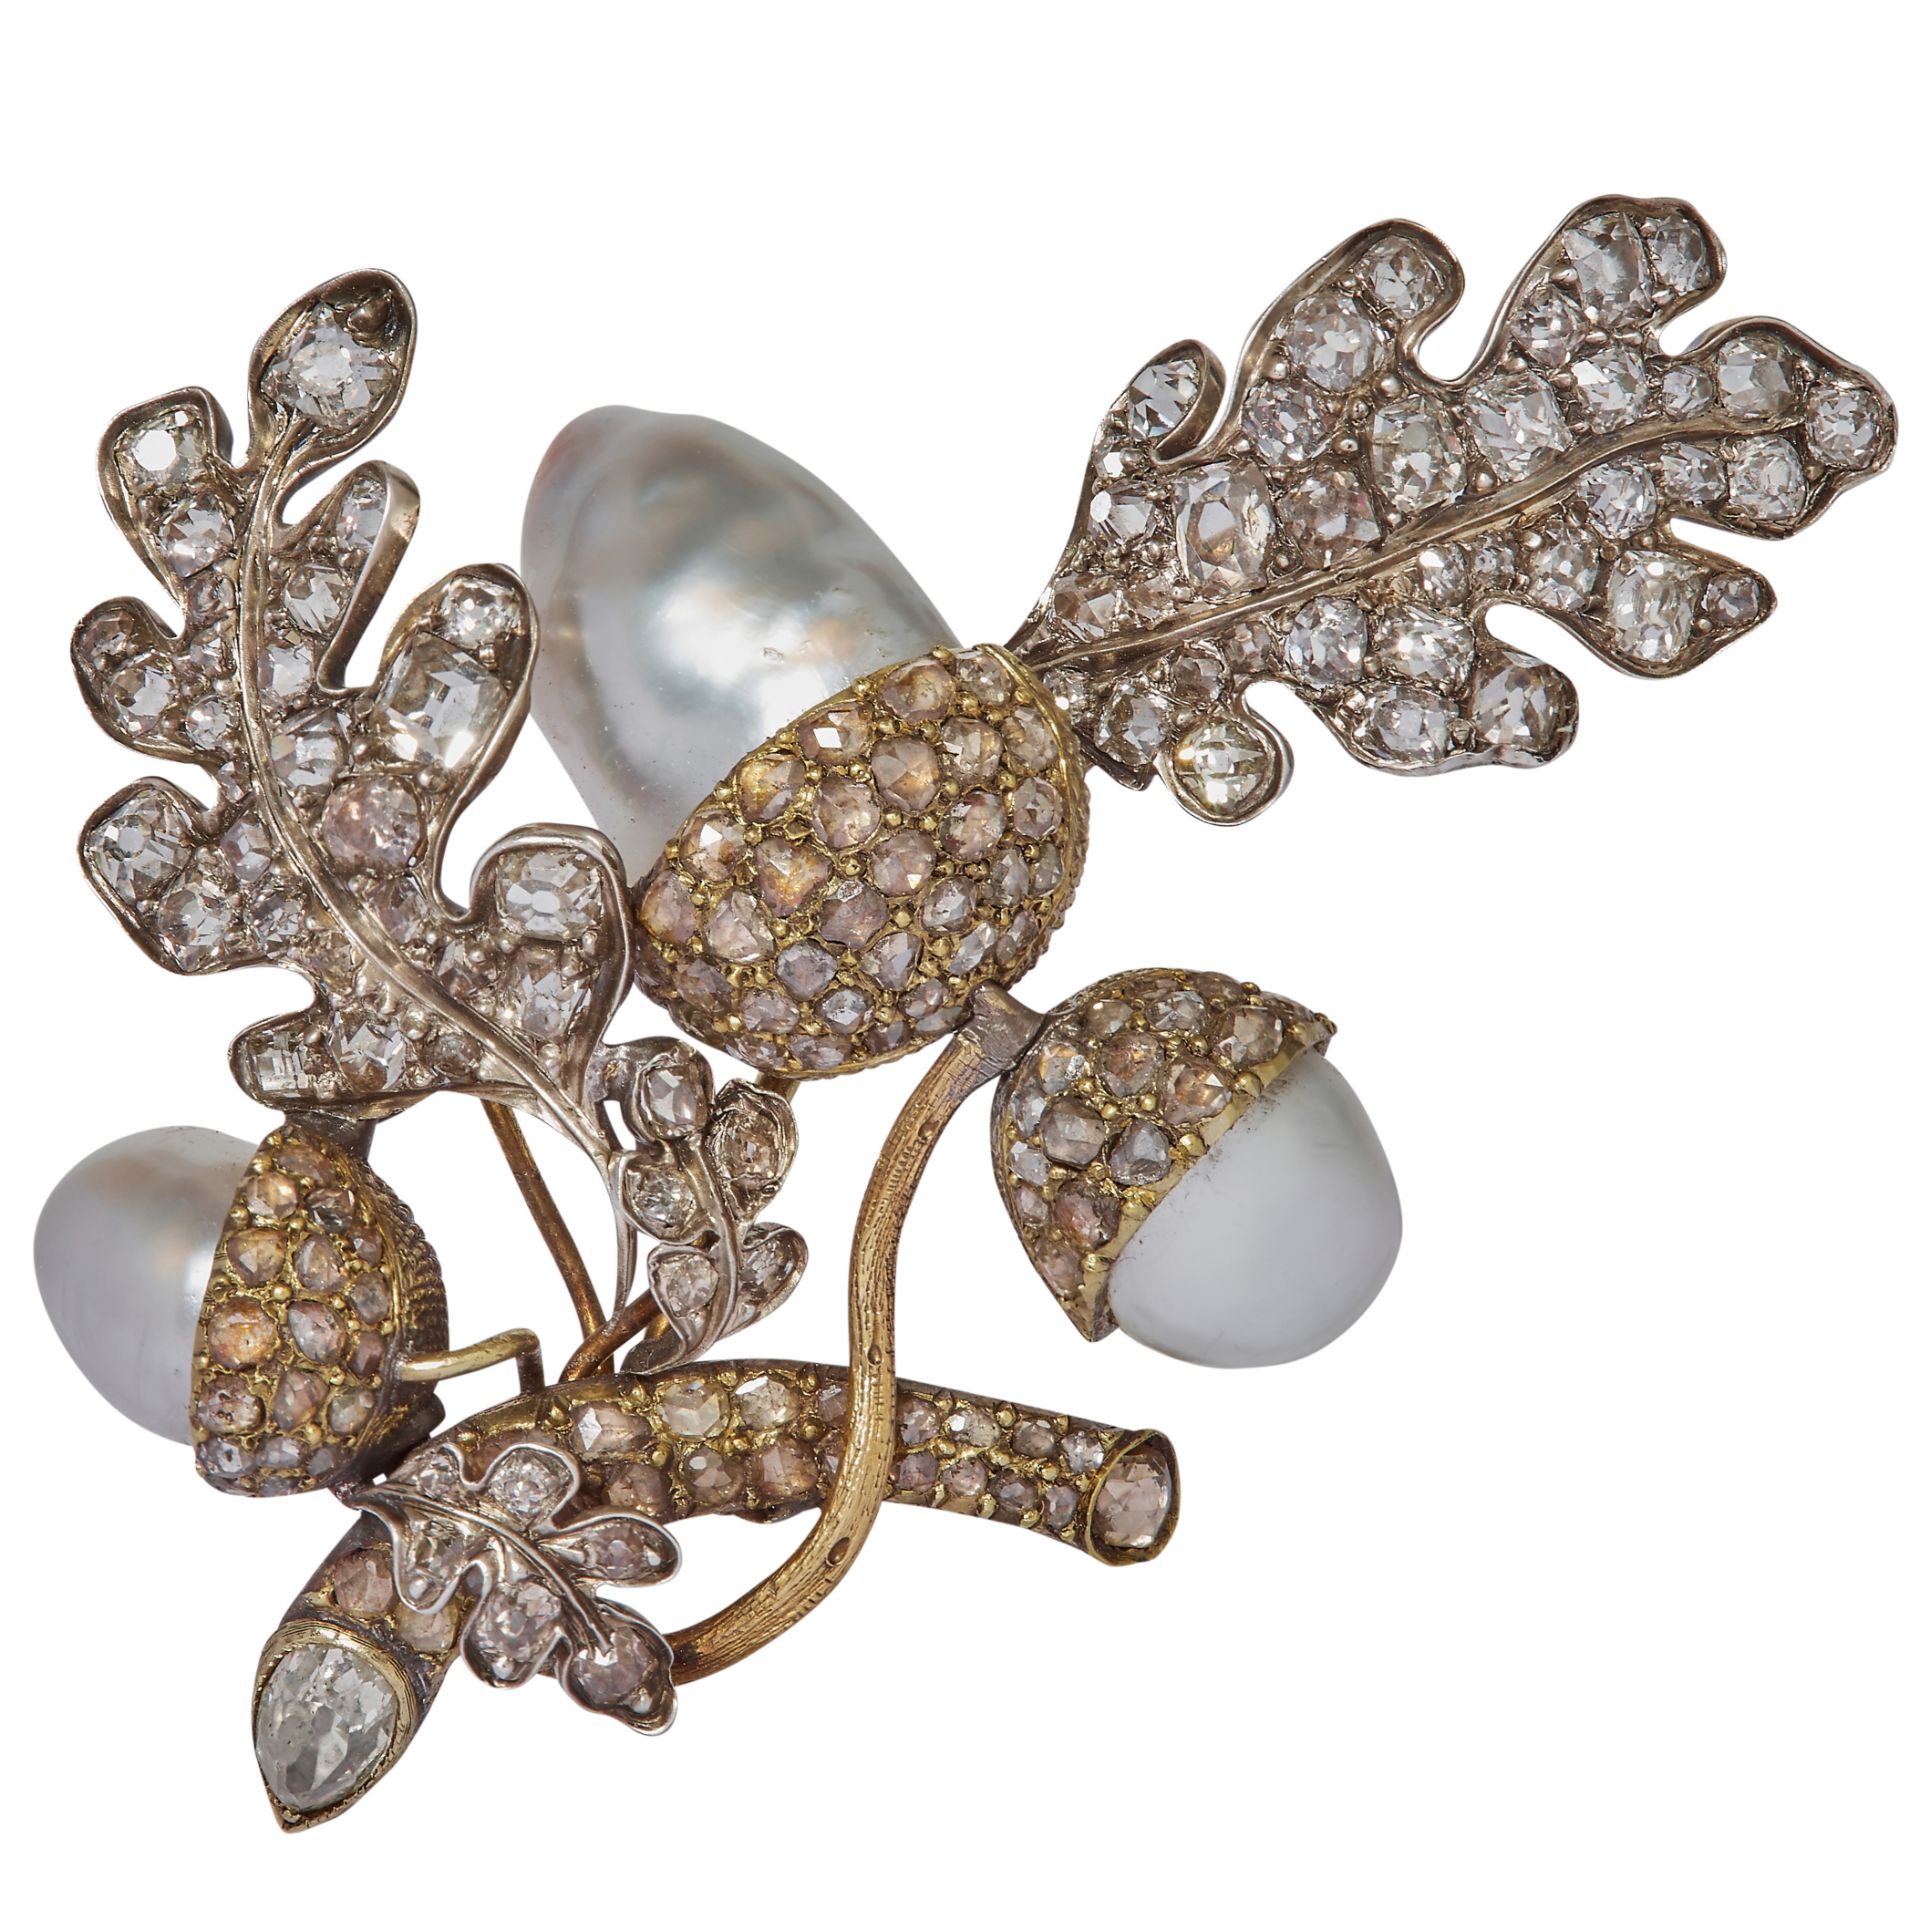 ROYAL GIFT BY KING CHRISTIAN VIII OF DENMARK, IMPORTANT ANTIQUE NATURAL PEARL AND DIAMOND ACORN BROO